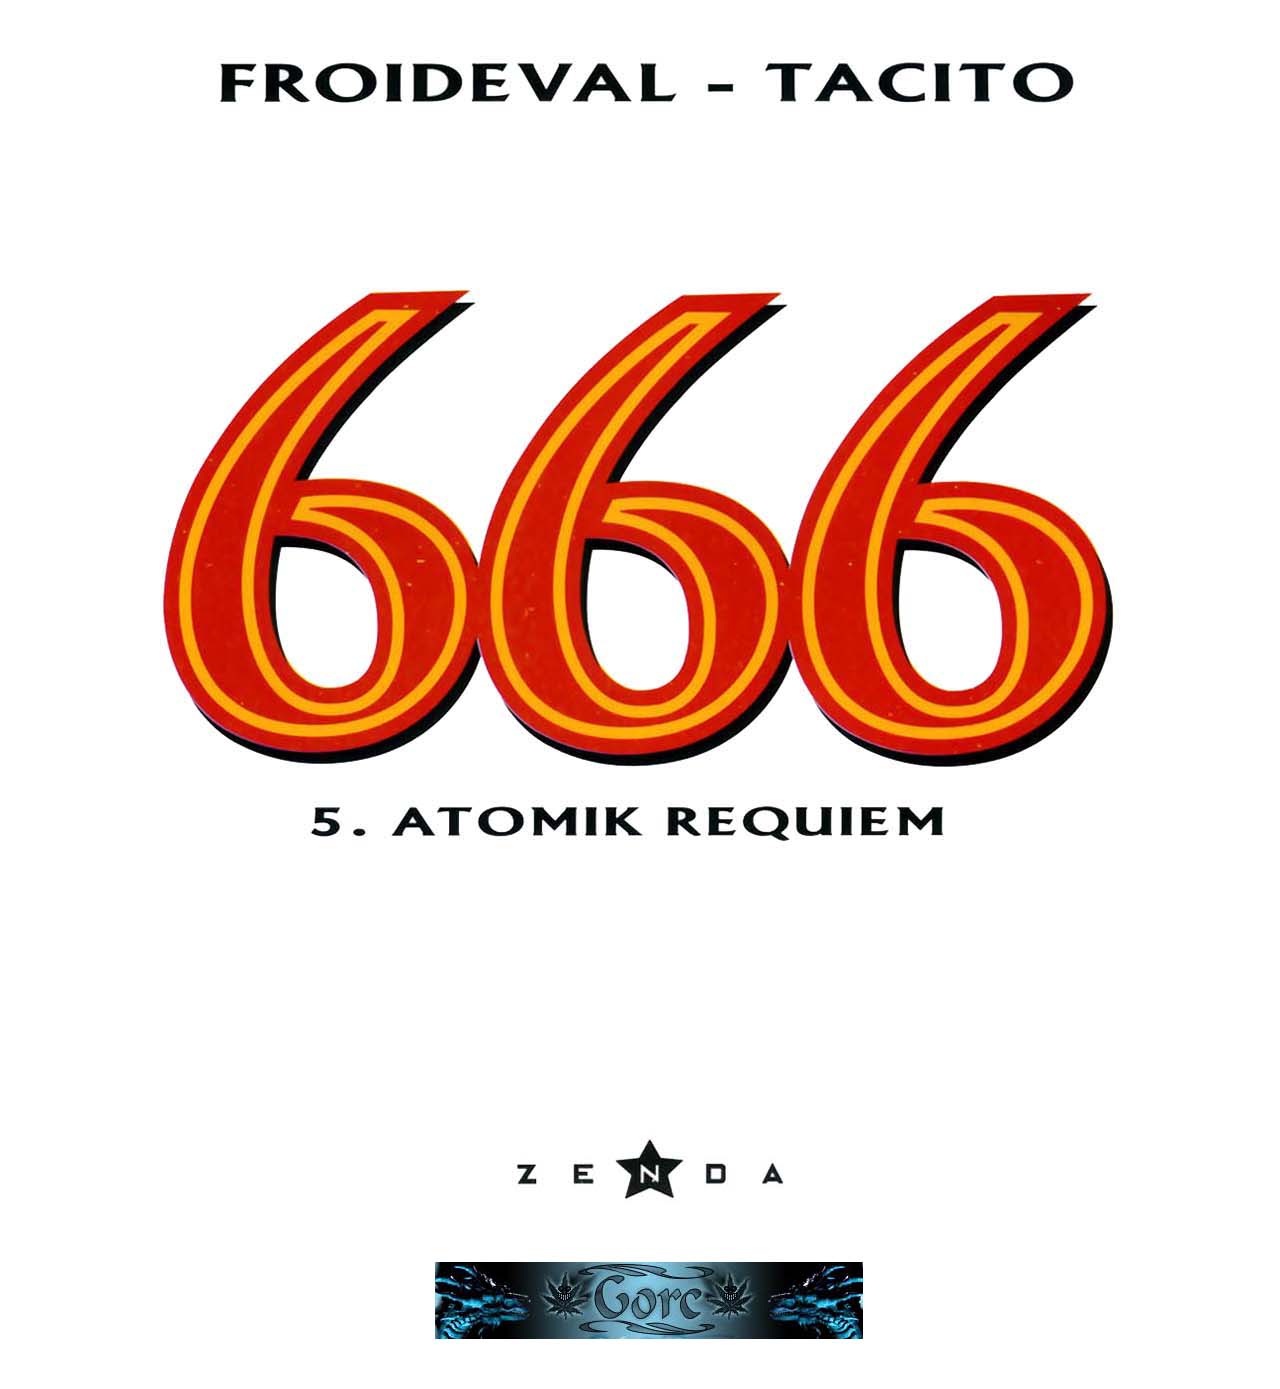 [Froideval, Tacito] 666 - 05 - Atomik Requiem [French] 